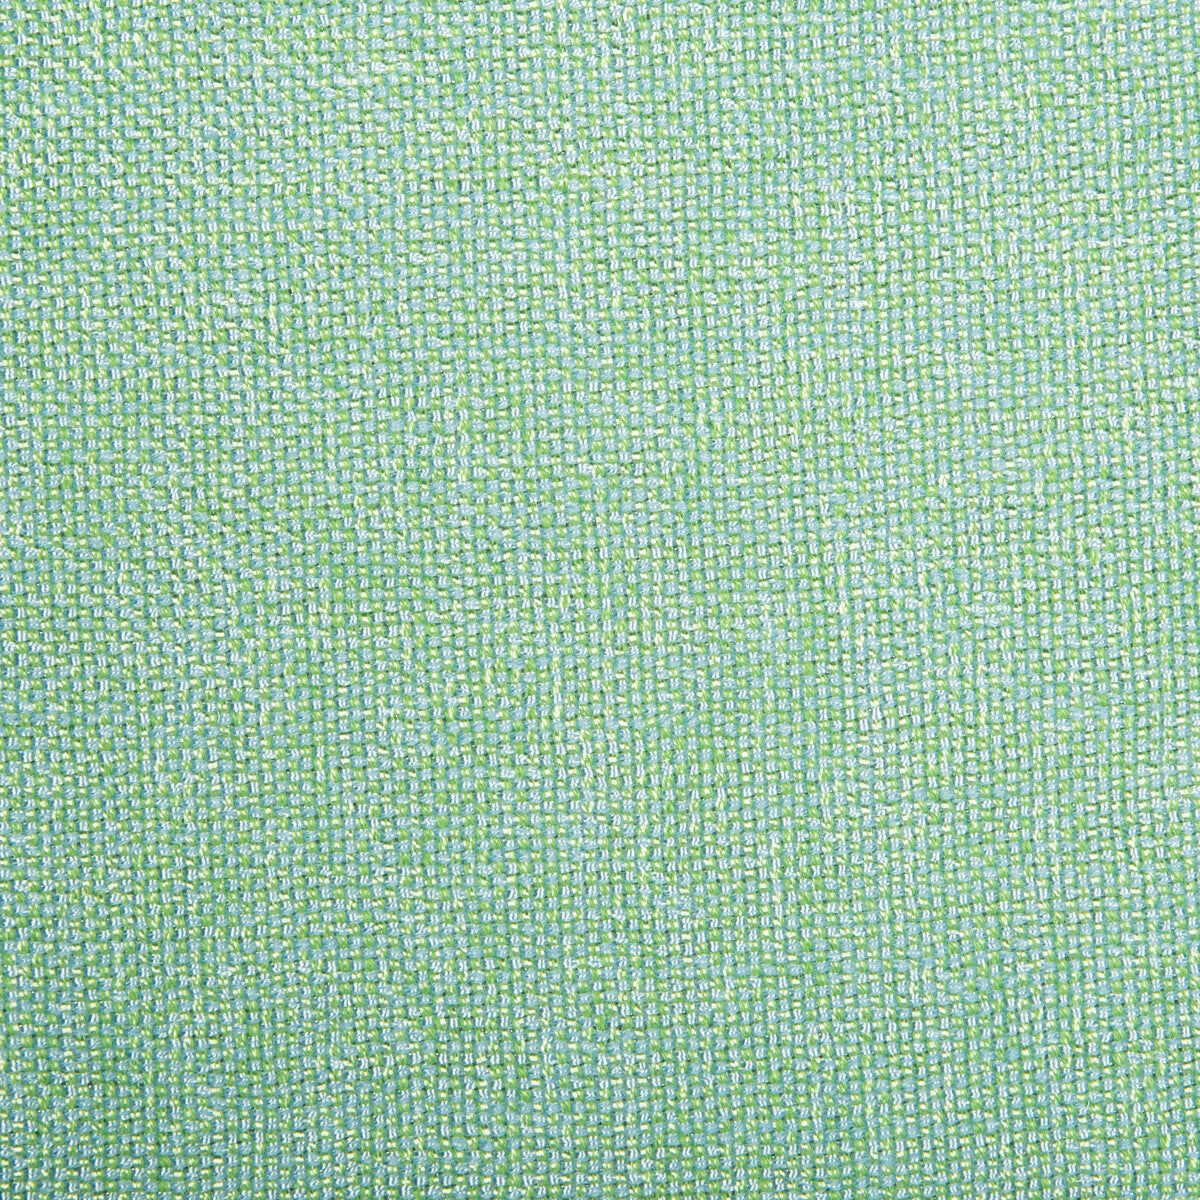 Kravet Contract fabric in 4458-1523 color - pattern 4458.1523.0 - by Kravet Contract